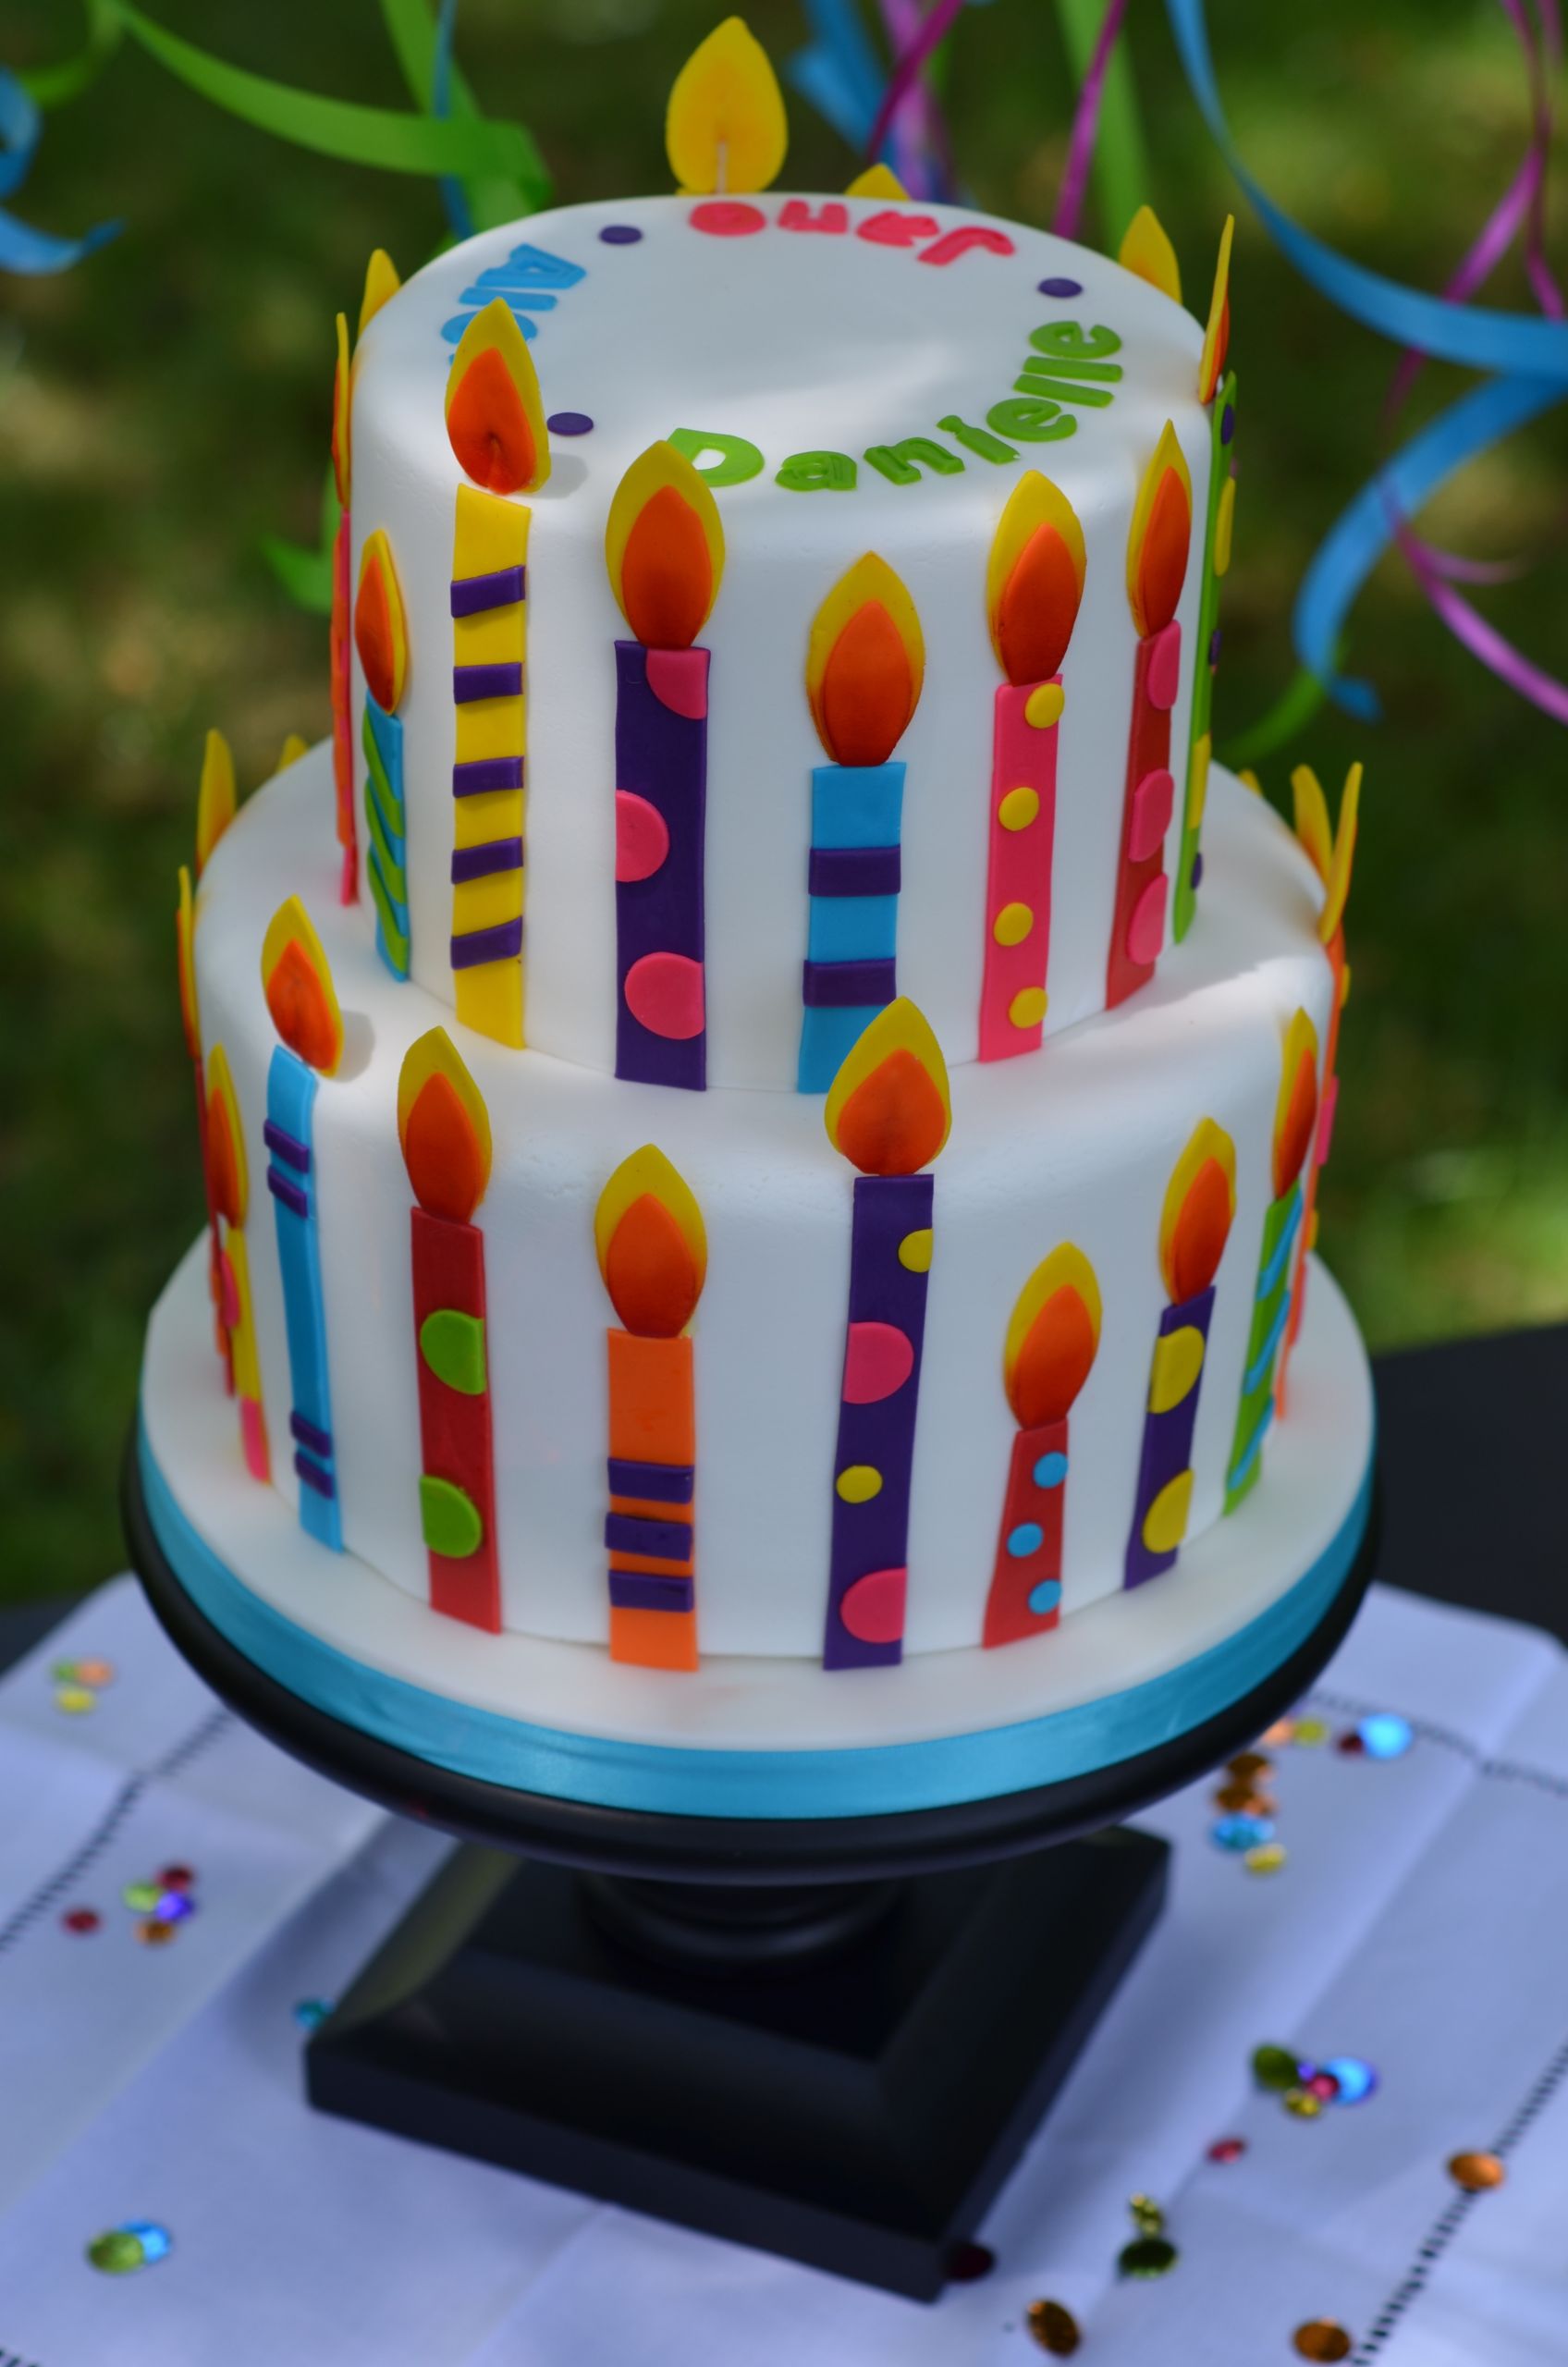 15 Of the Best Real Simple Birthday Cake with Candles
 Ever